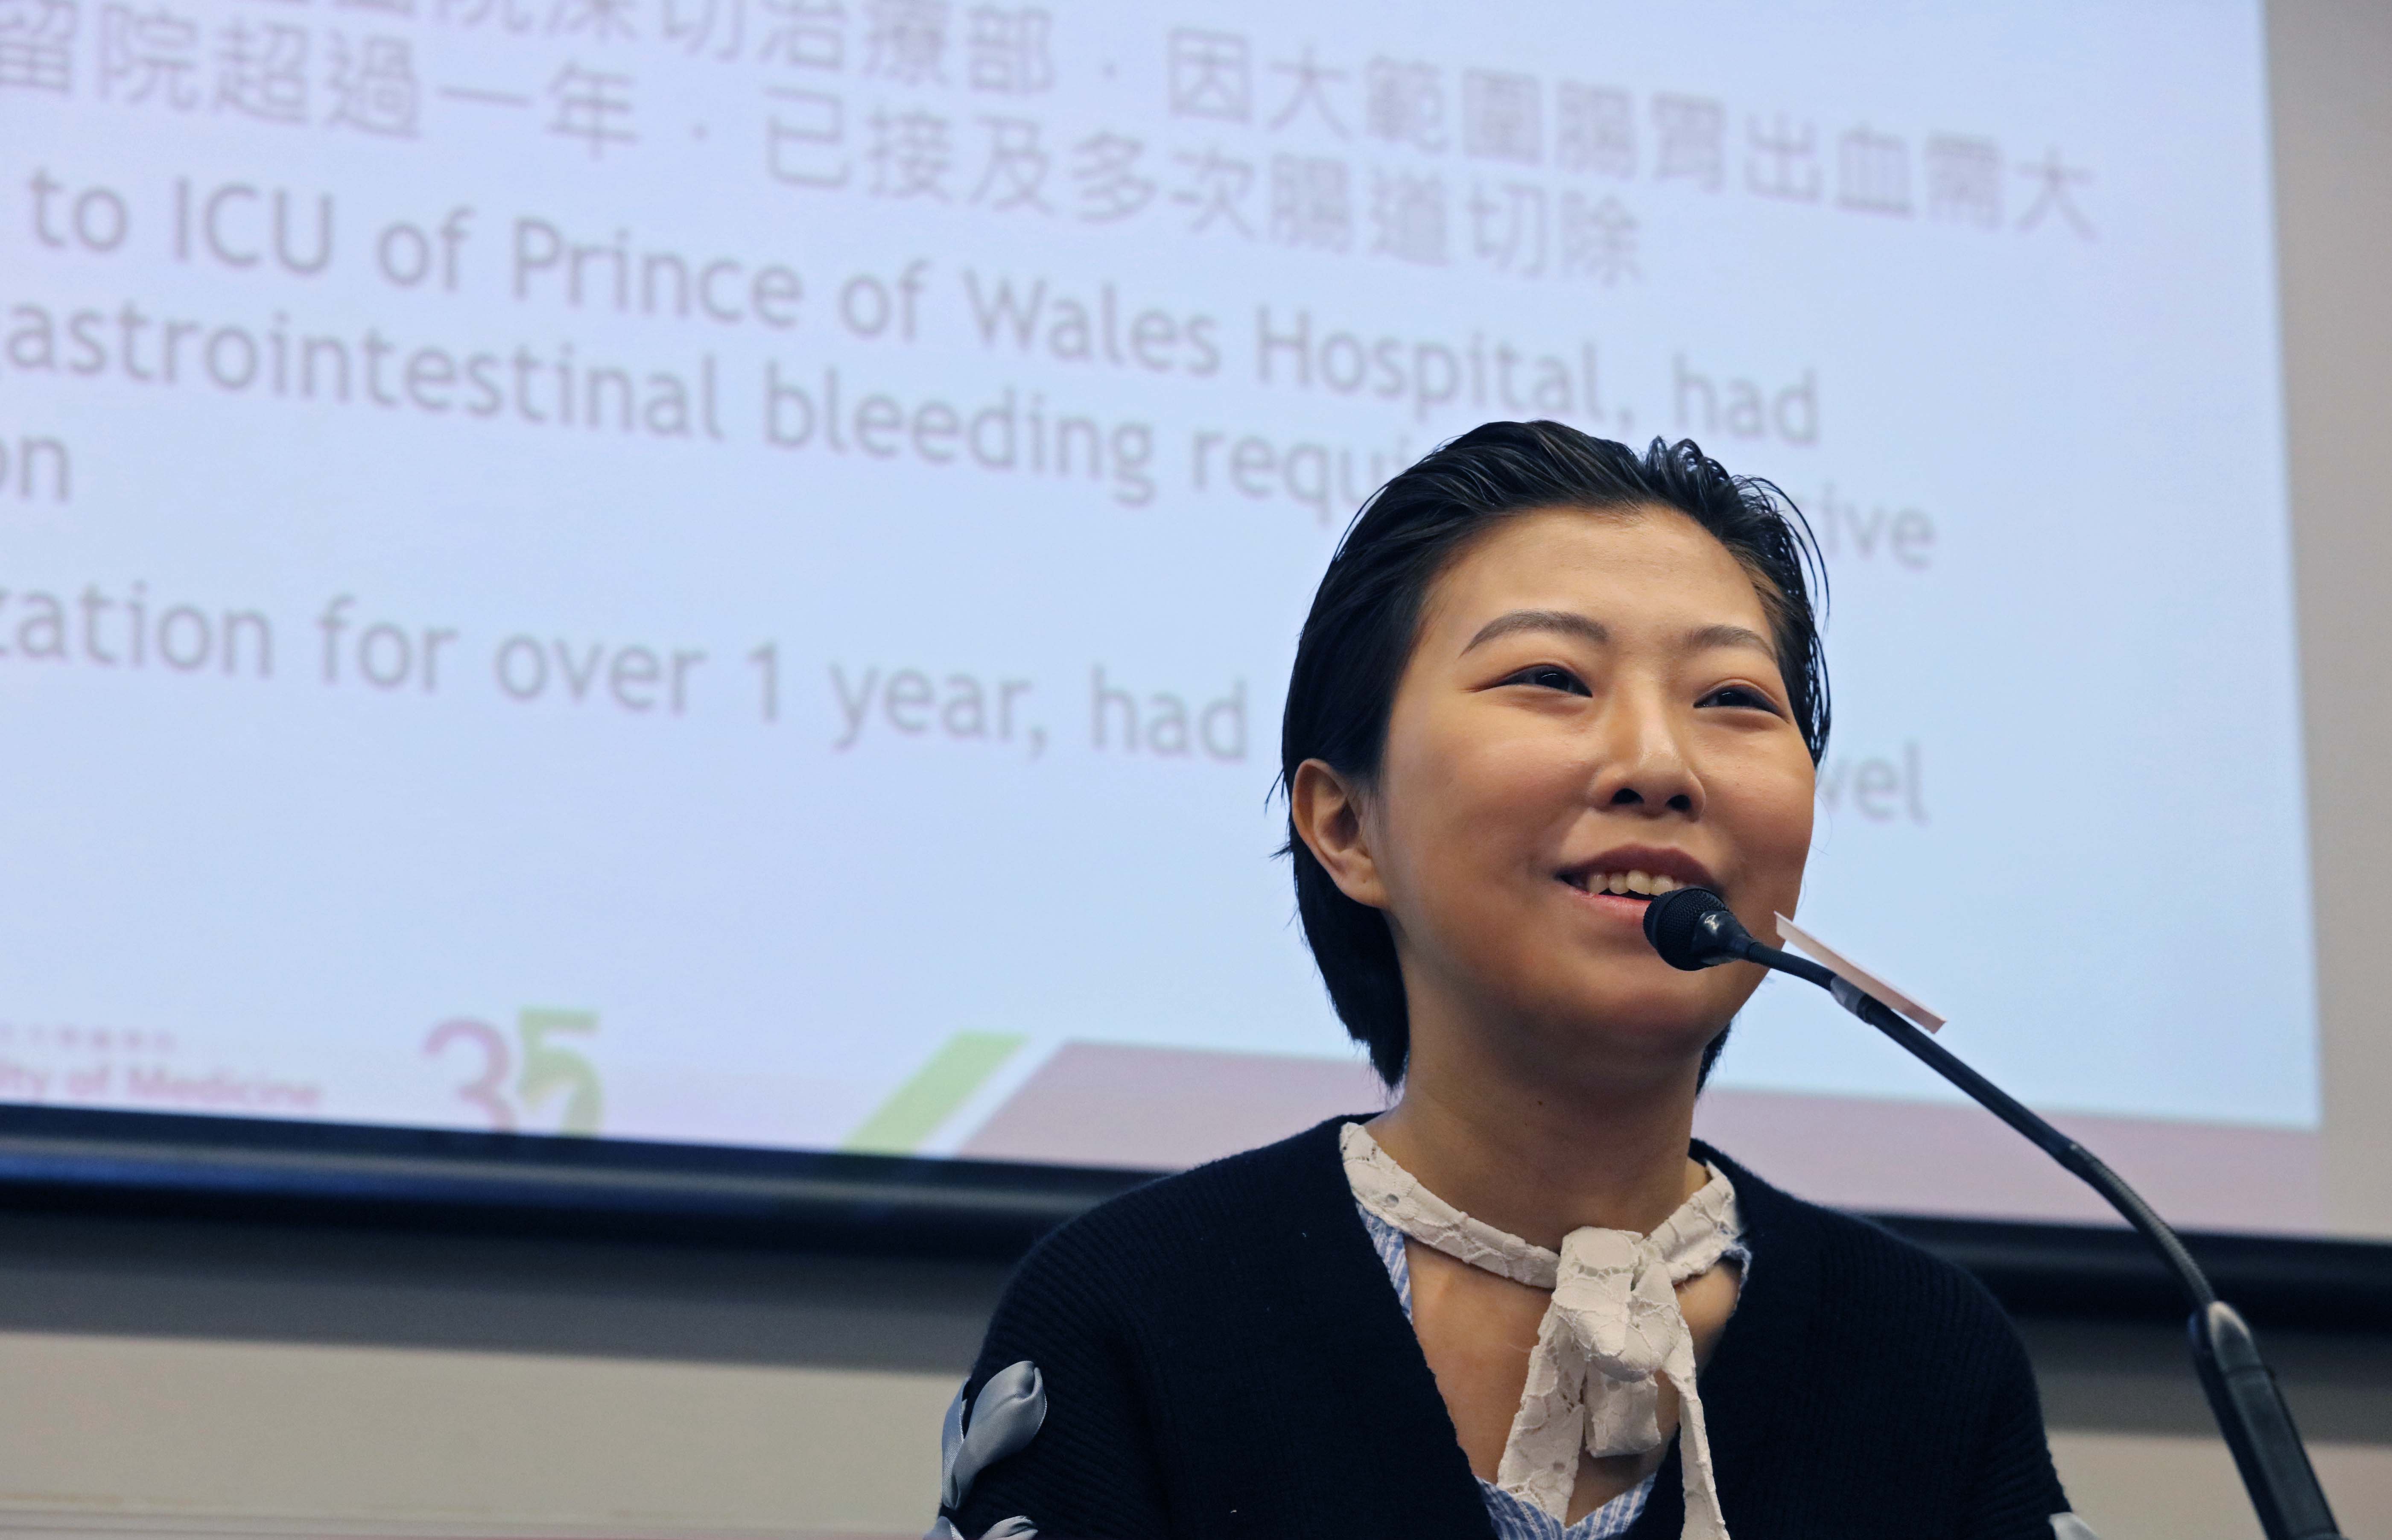 Miss SUM was diagnosed with Crohn’s disease in 2016, a subtype of Inflammatory Bowel Diseases (IBD). She wishes studies of the gastroenterology team of the Faculty of Medicine at CUHK could figure out the cause of the disease and relieve IBD patients from the suffering.